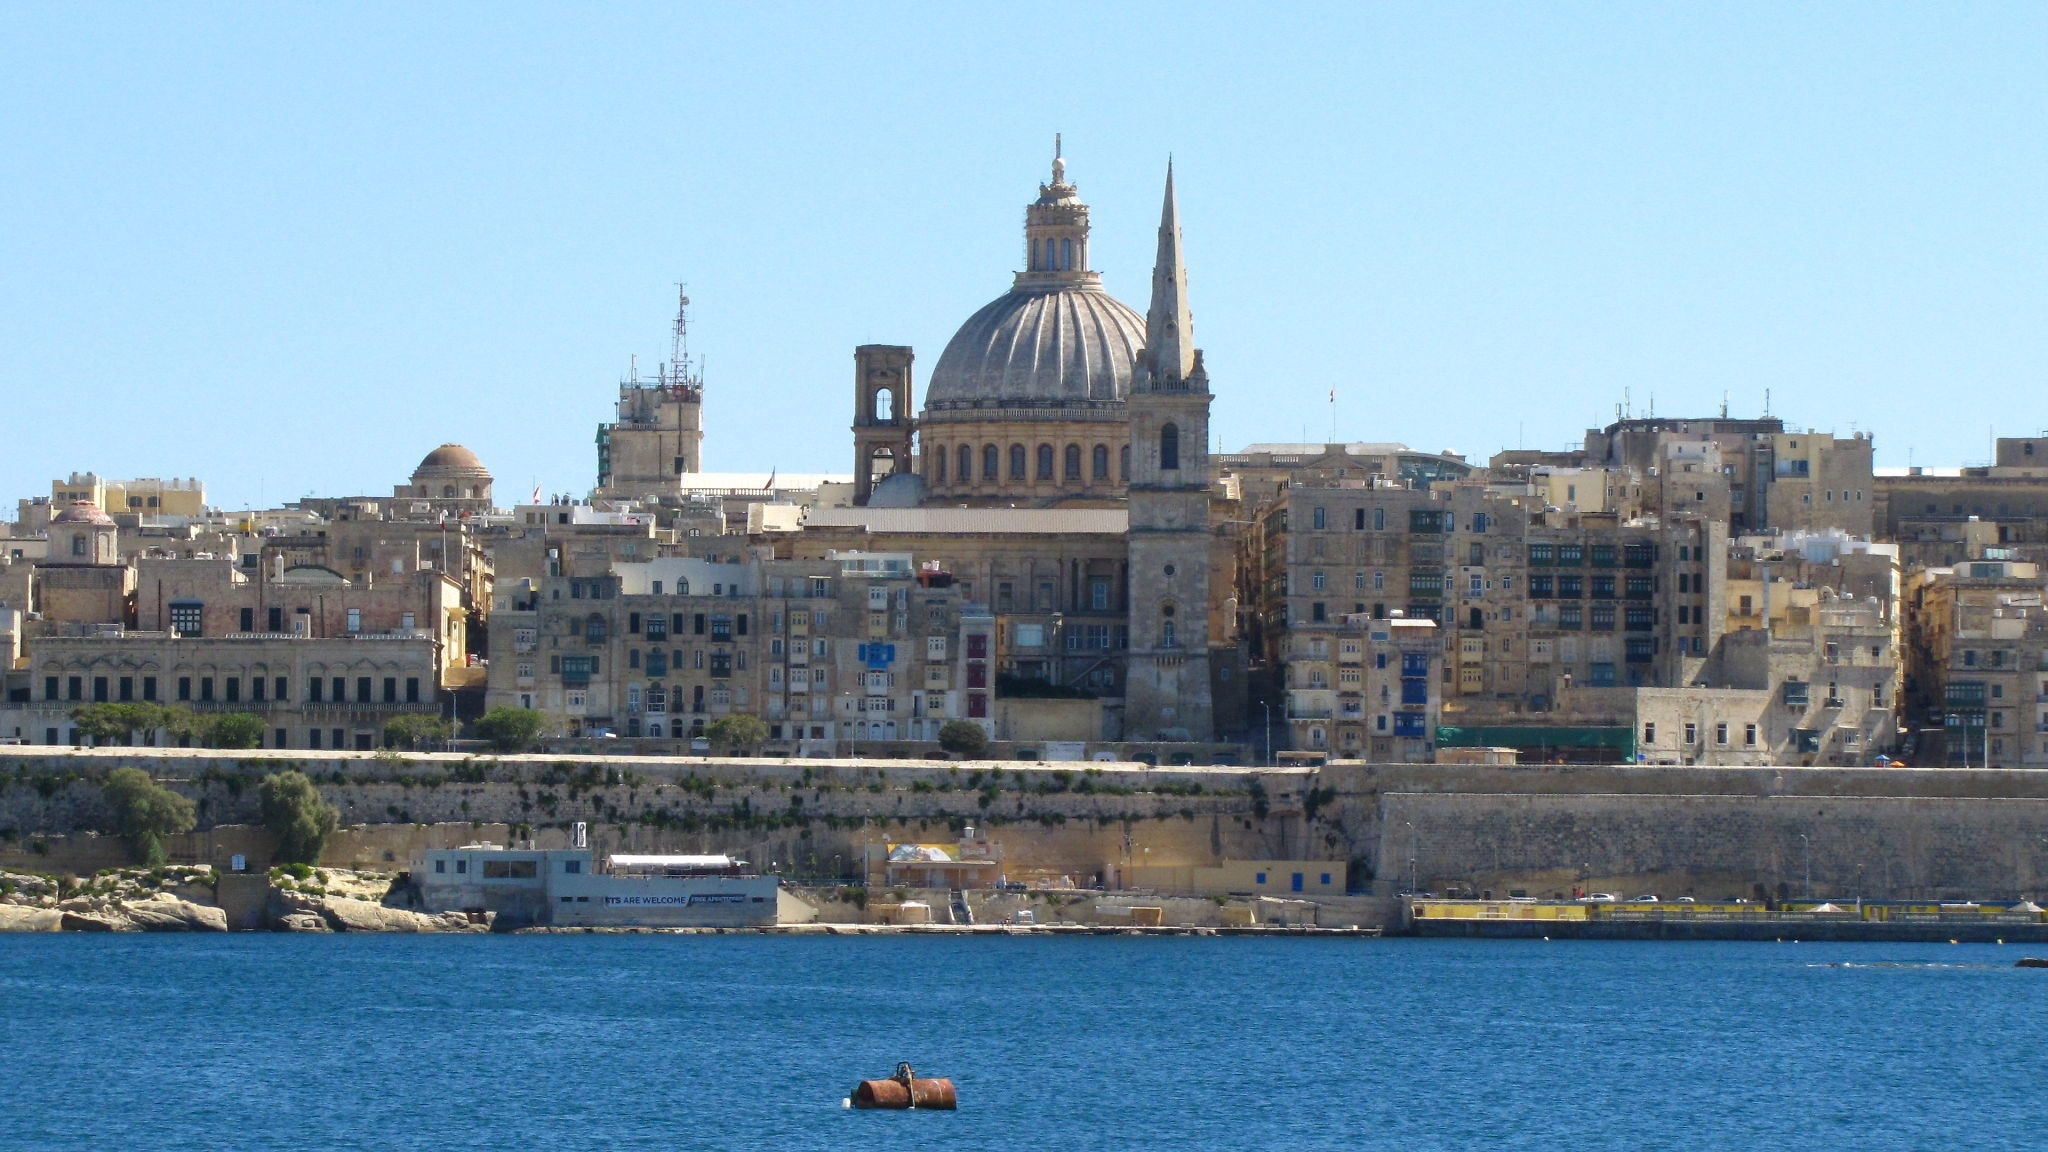 Beautiful view from Sliema Ferry station to Valletta.

If you stay in a hotel in Sliema it only needs 5 minutes with the Sliema Ferry to Valletta. Very fast and easy. A return ticket costs 2.80 Euro.